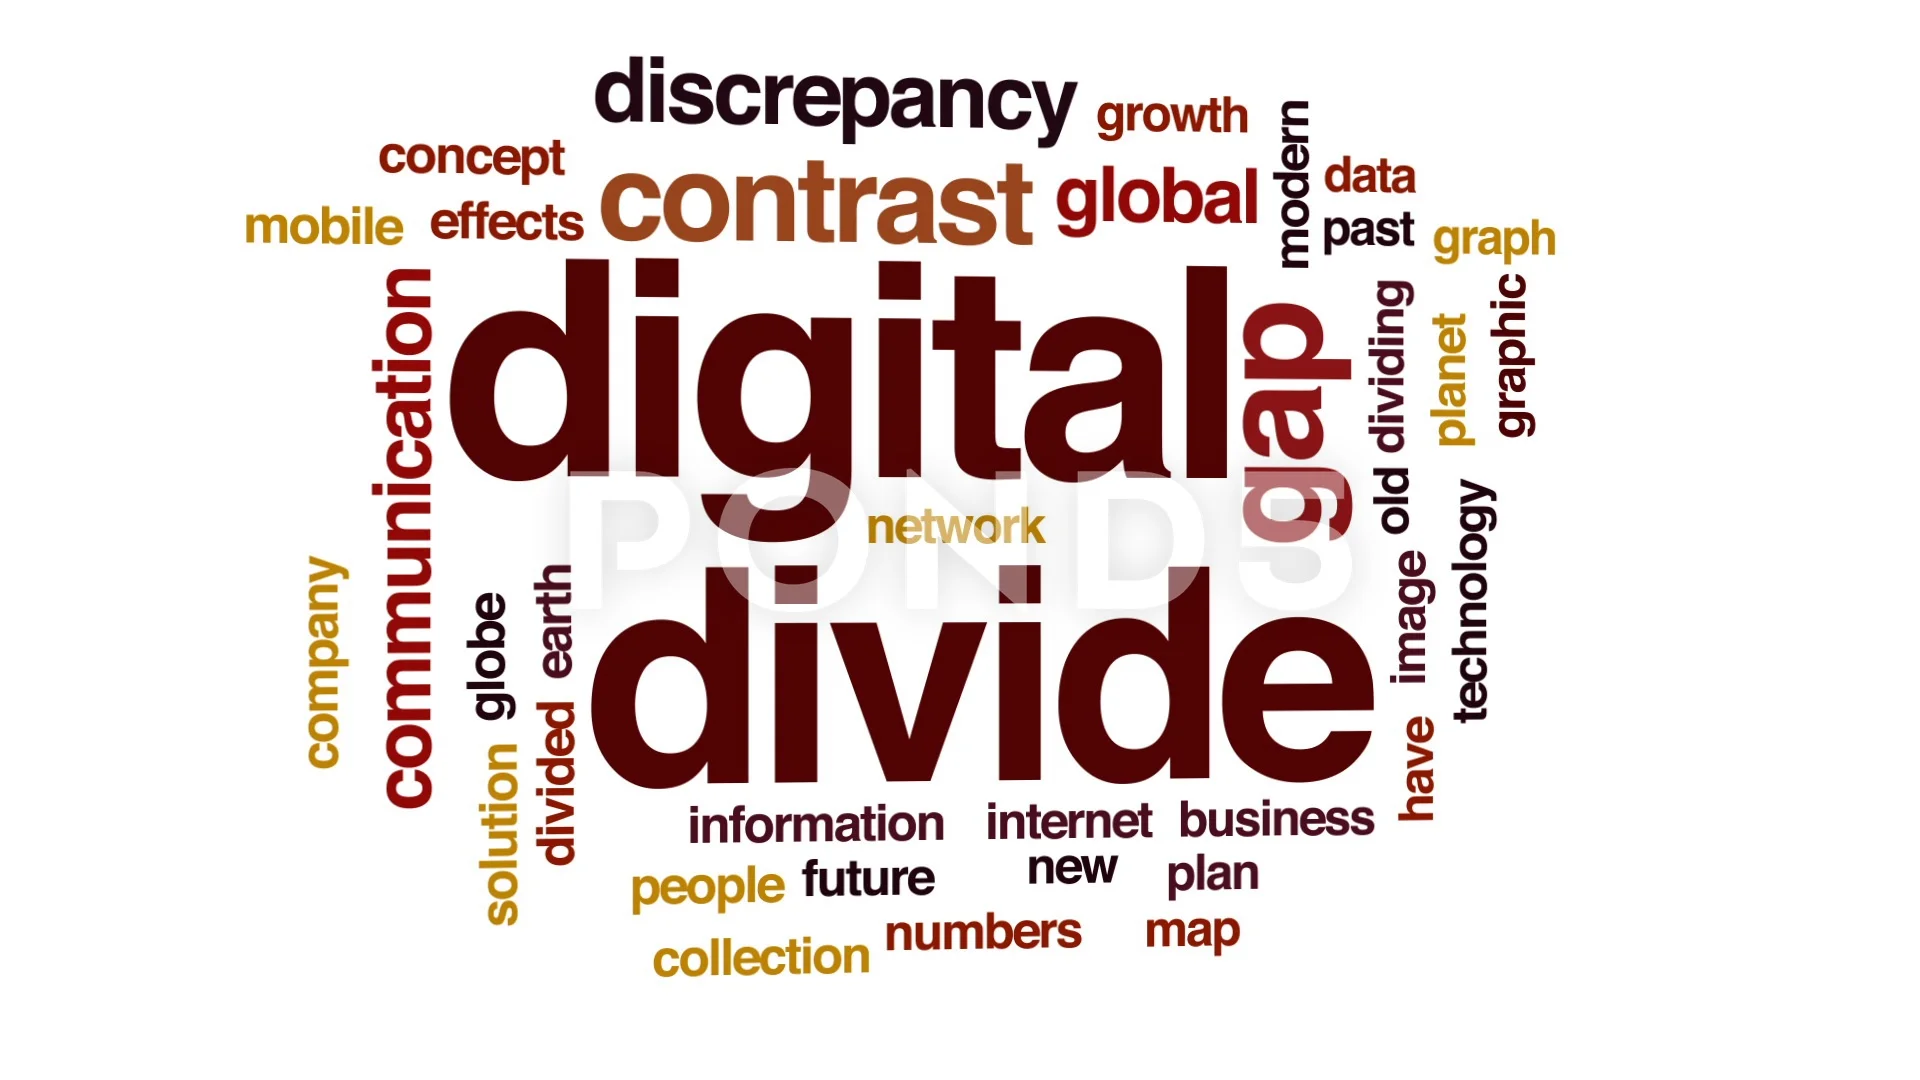 solutions to the global digital divide